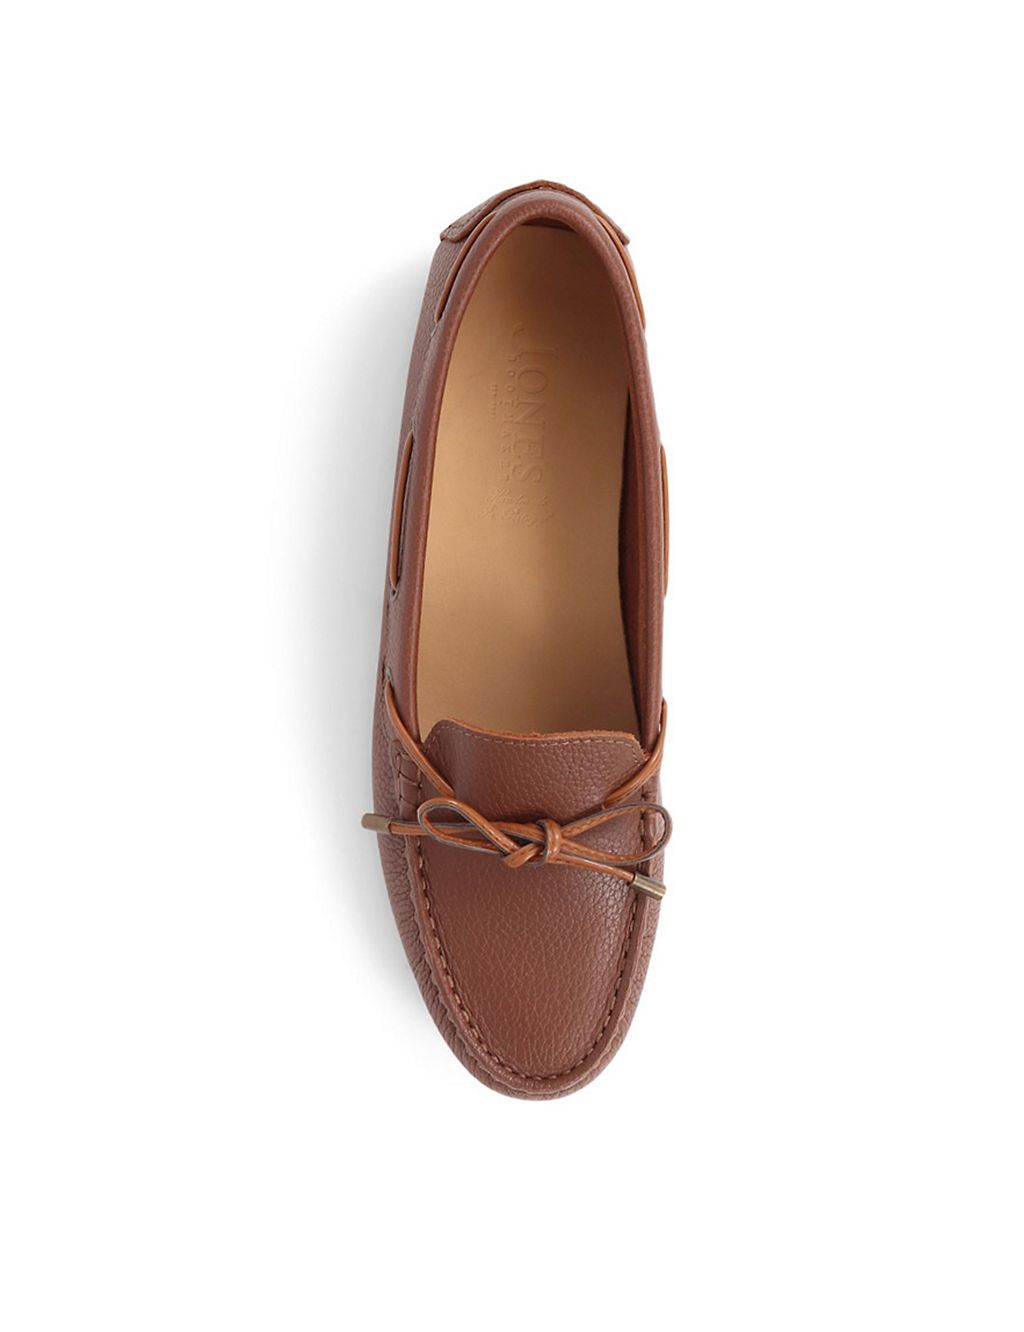 Leather Bow Slip On Flat Boat Shoes 7 of 7